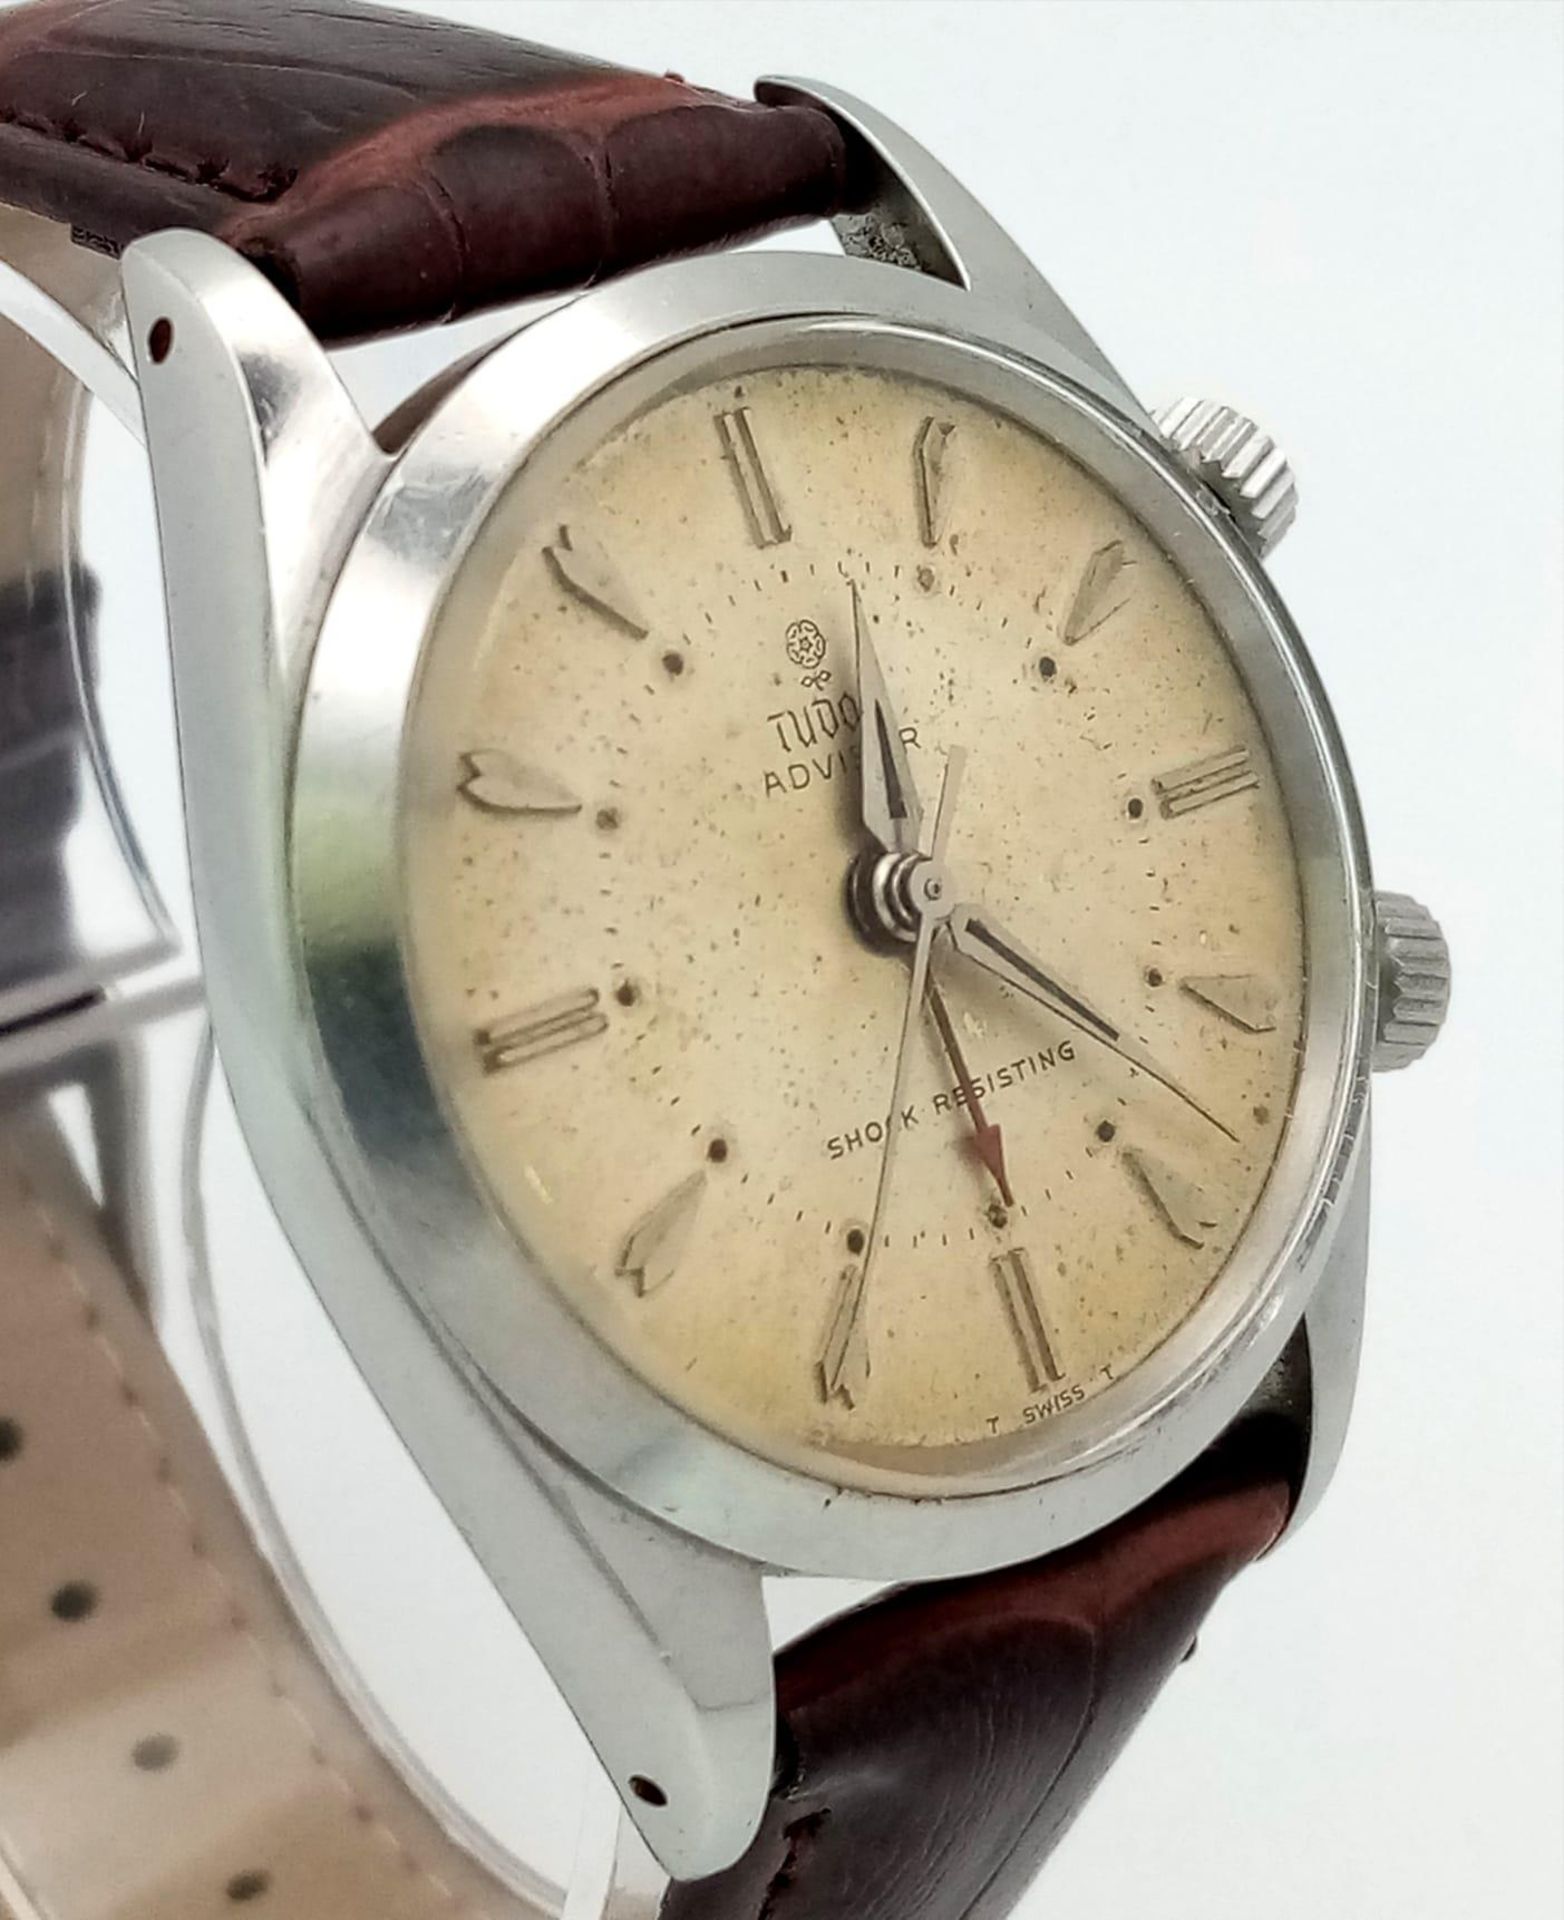 A Very Rare (1950s) Tudor Advisor Alarm Gents Watch. Brown leather strap. Steel case - 34mm. Gilt - Image 3 of 5